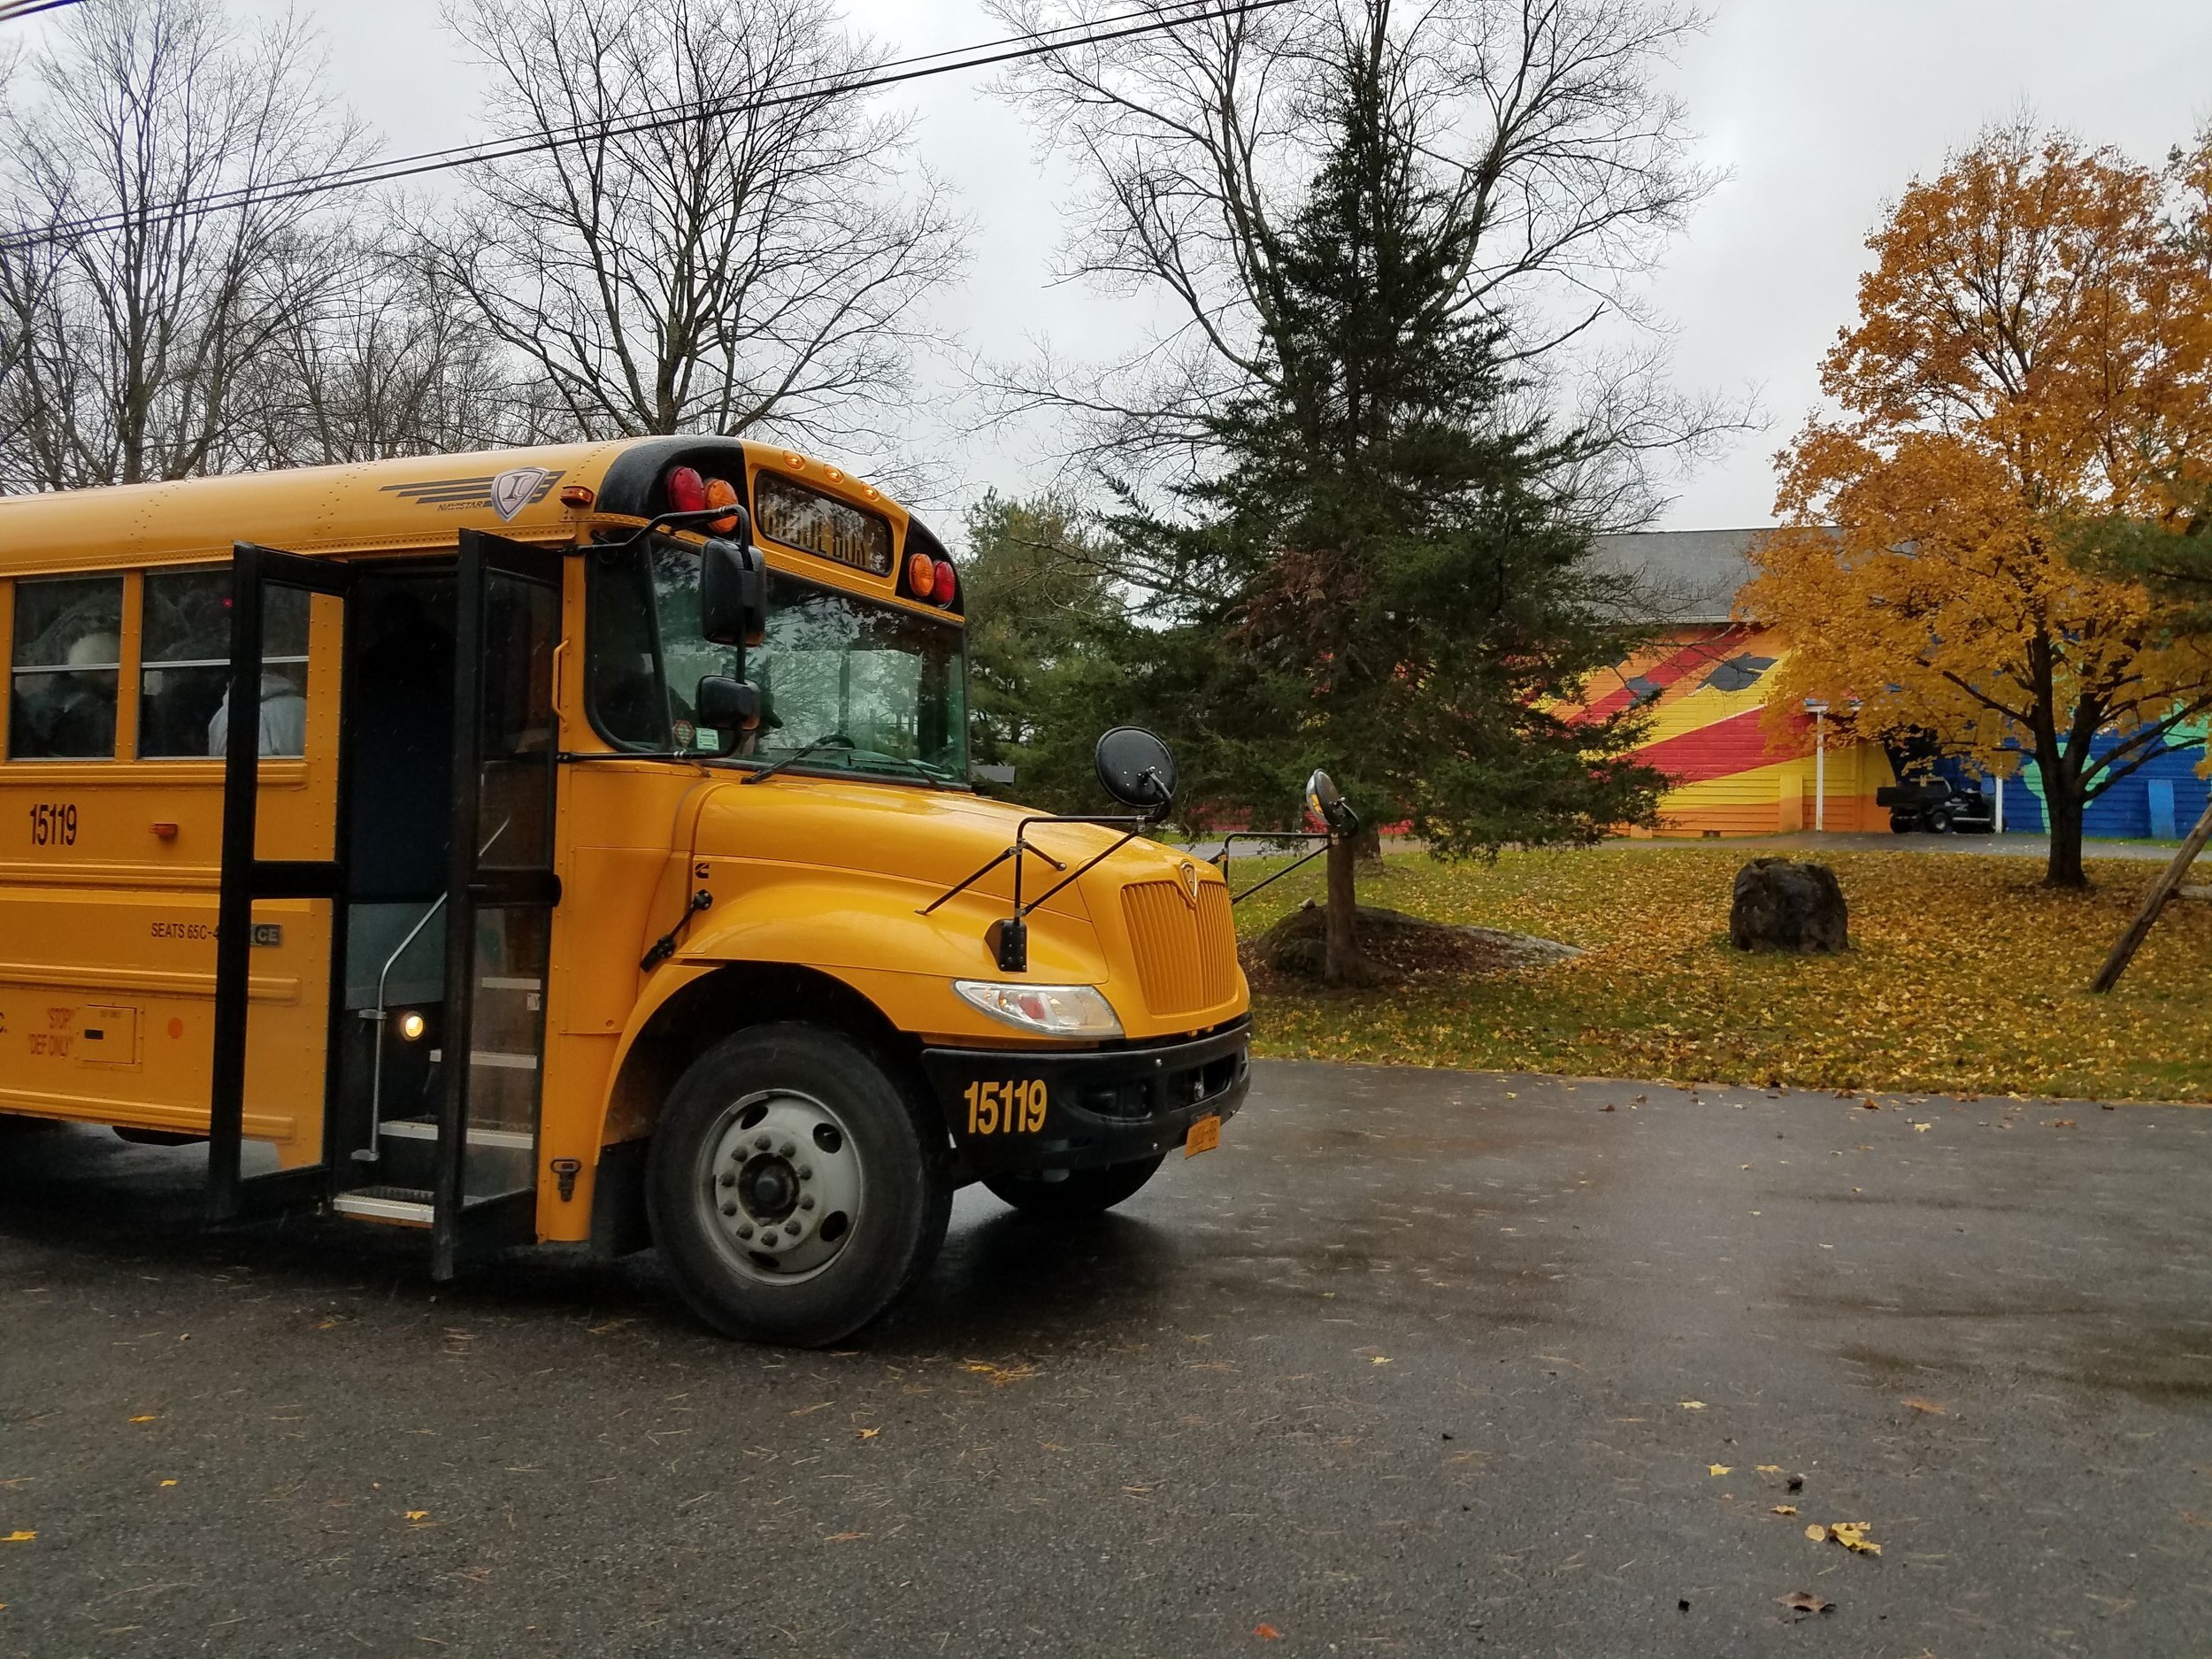  A school bus parked outside the Main Building 